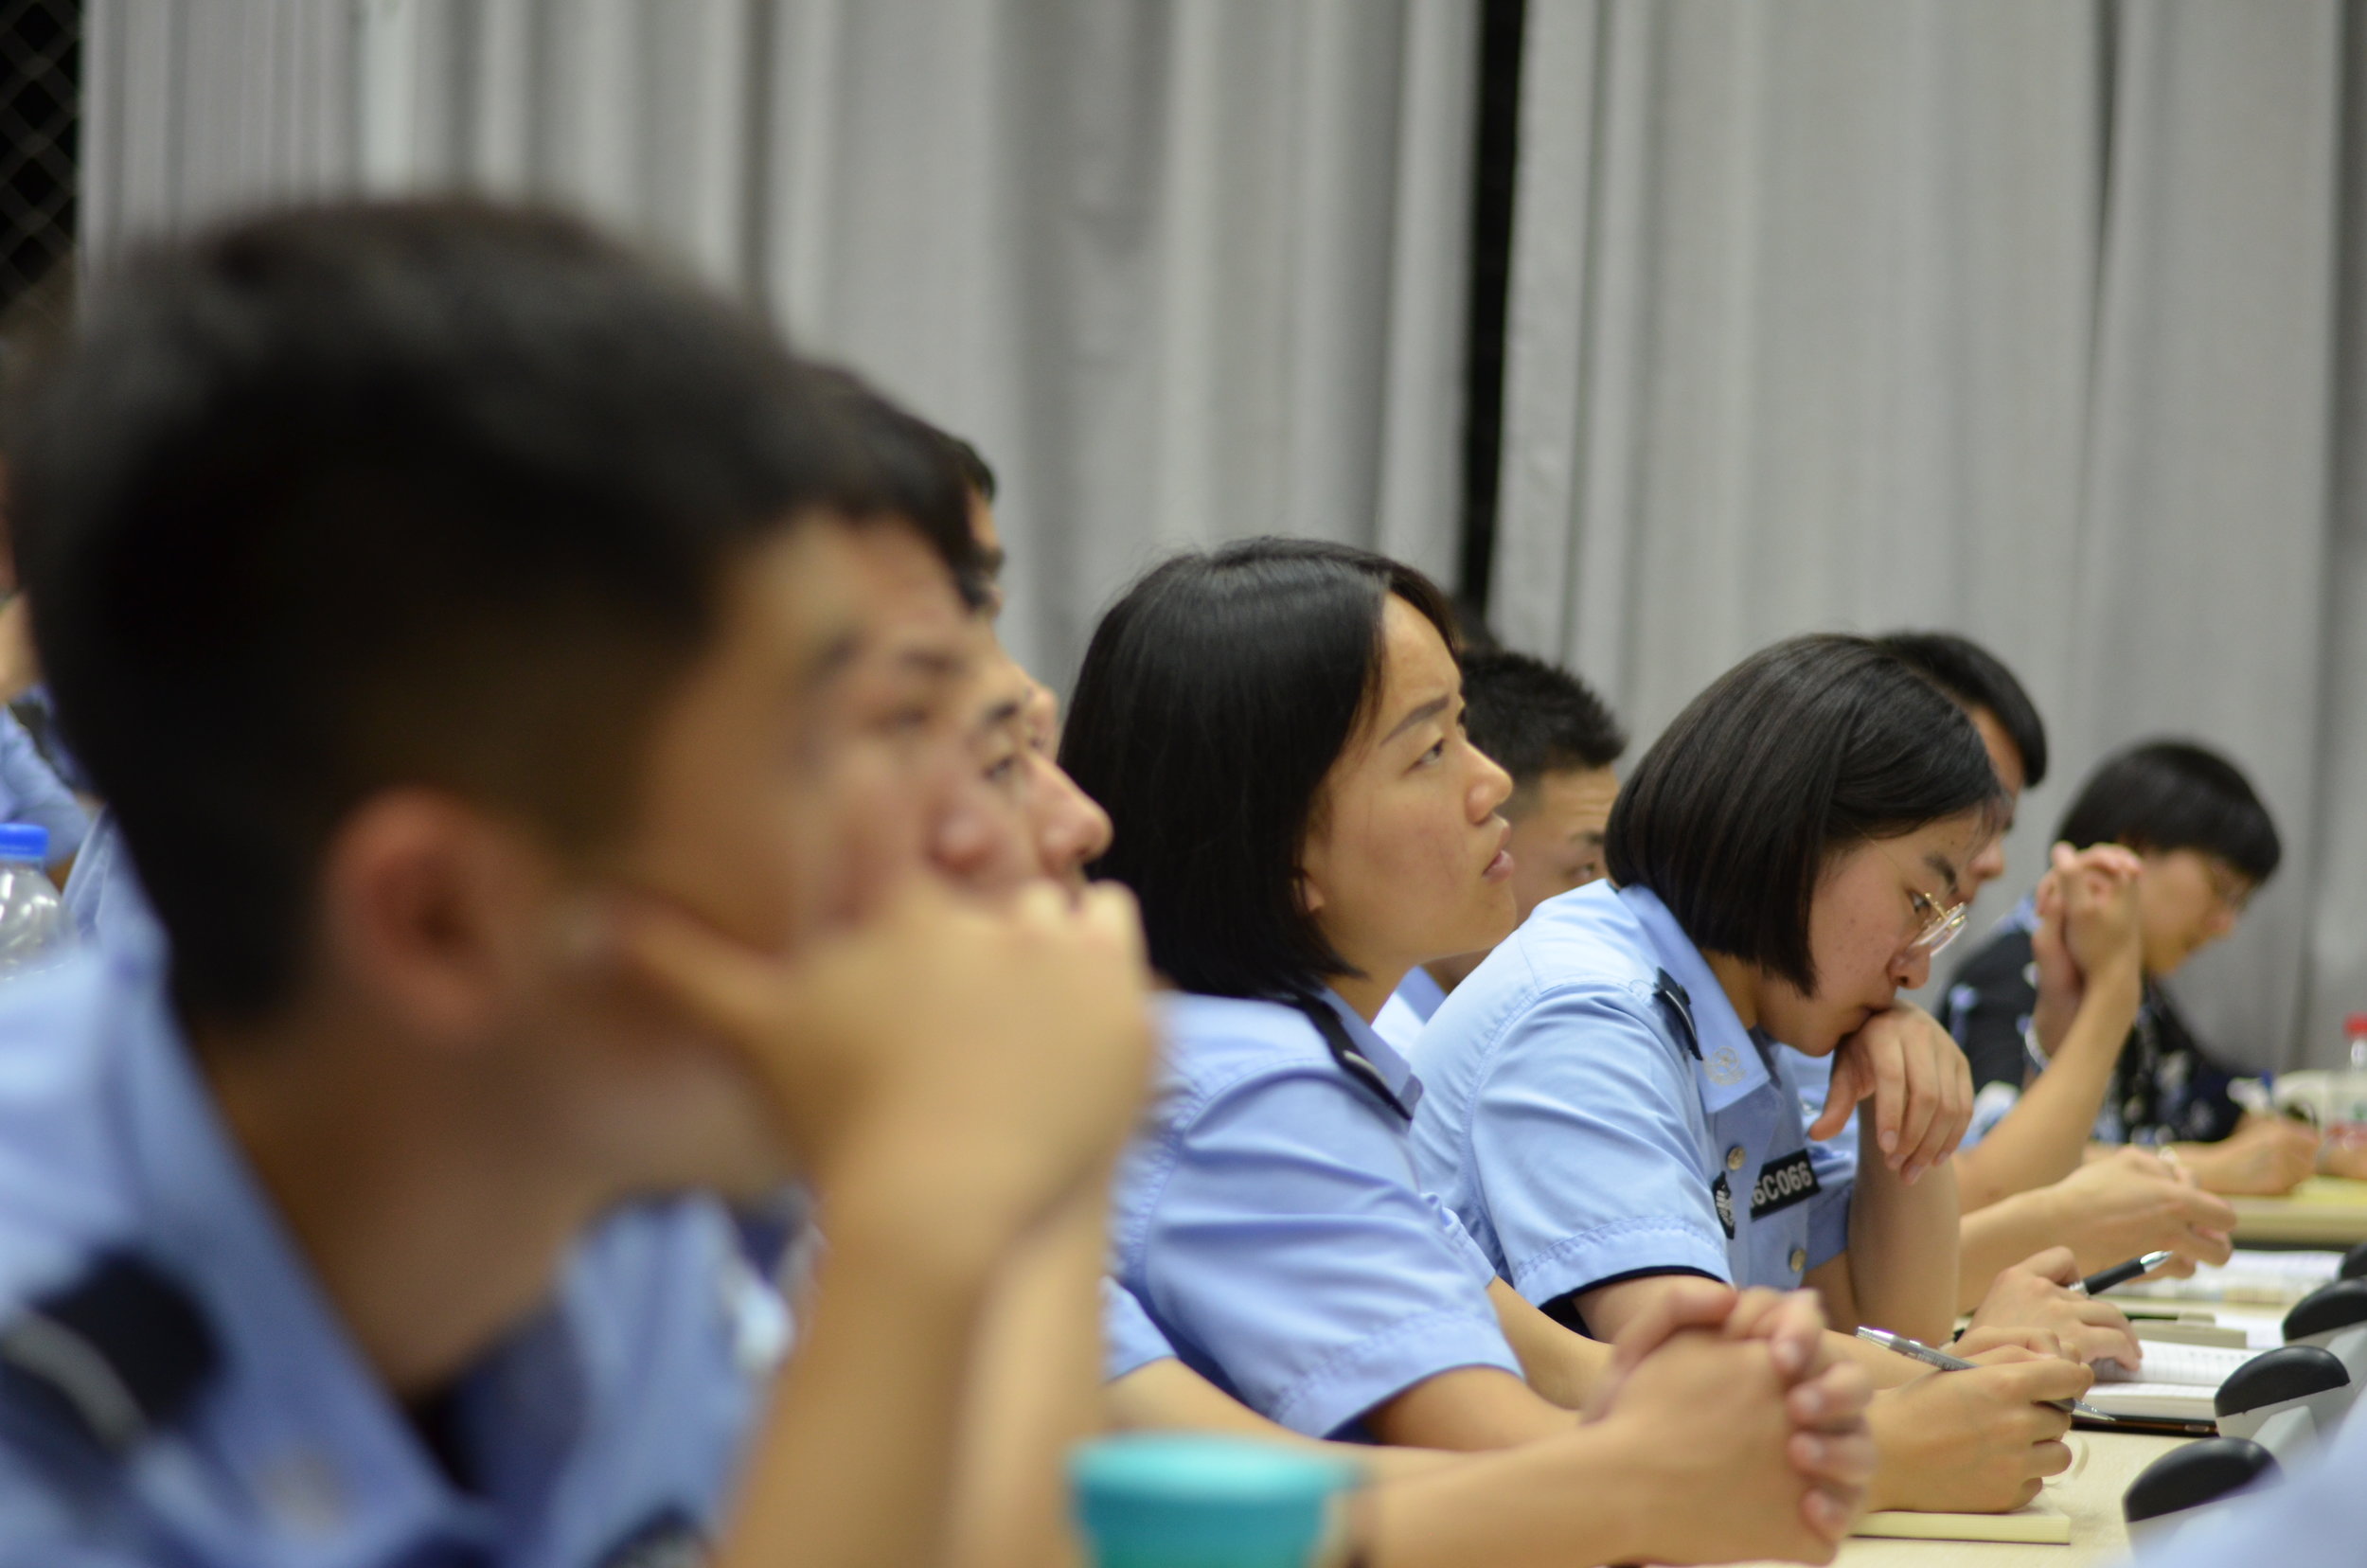 Students at People's Public Security University listening attentively